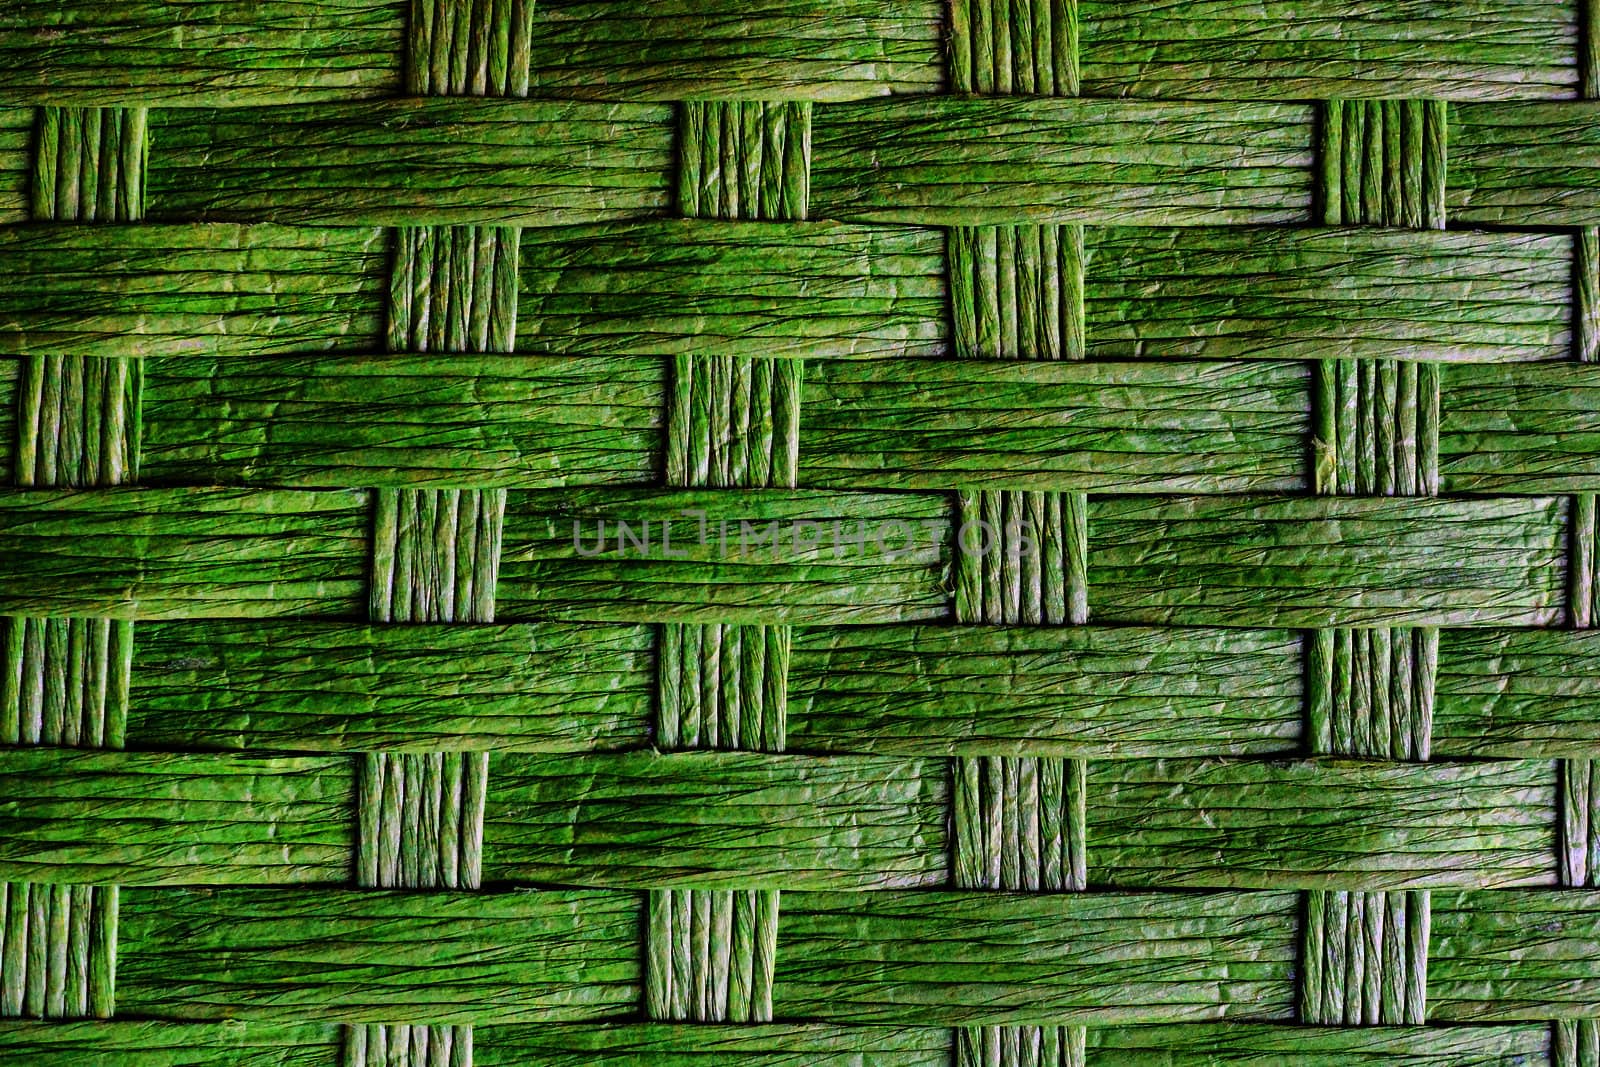 Green wicker basket detail , pattern and texture wallpaper or background.